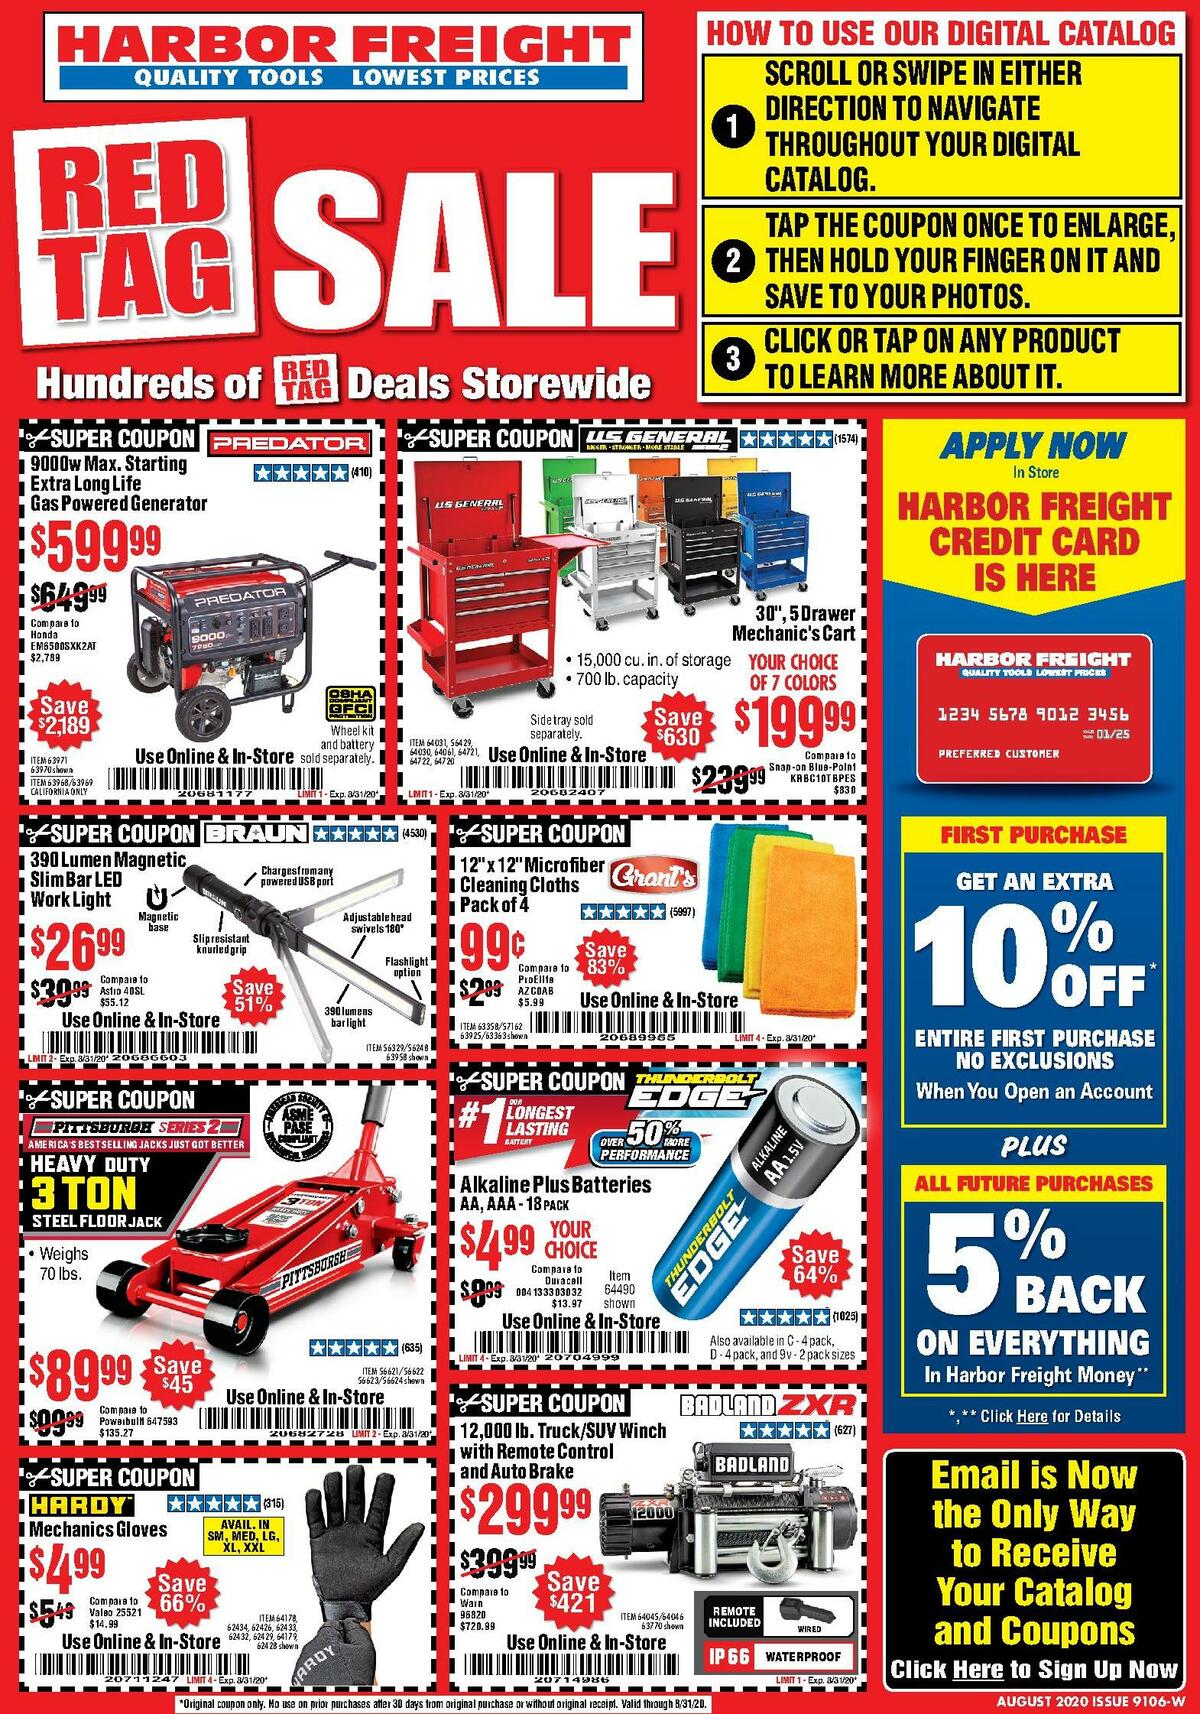 Harbor Freight Tools Best Offers amp Special Buys from August 1